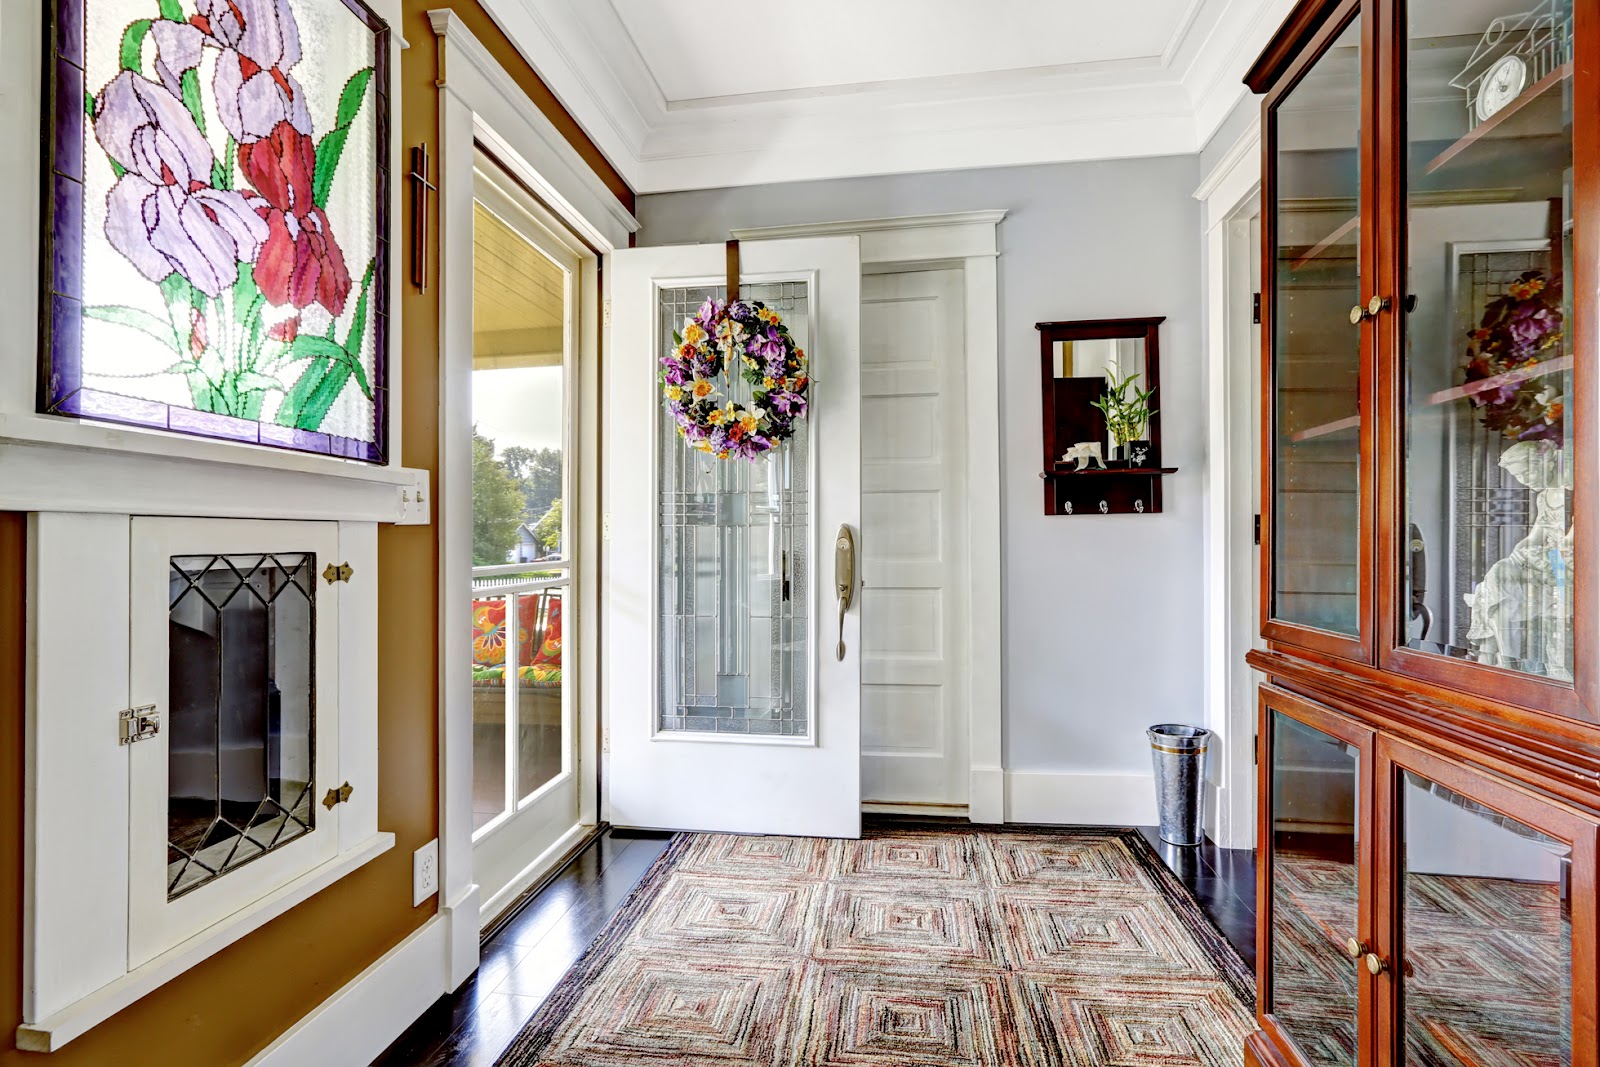 An open white door with glass insert in entryway